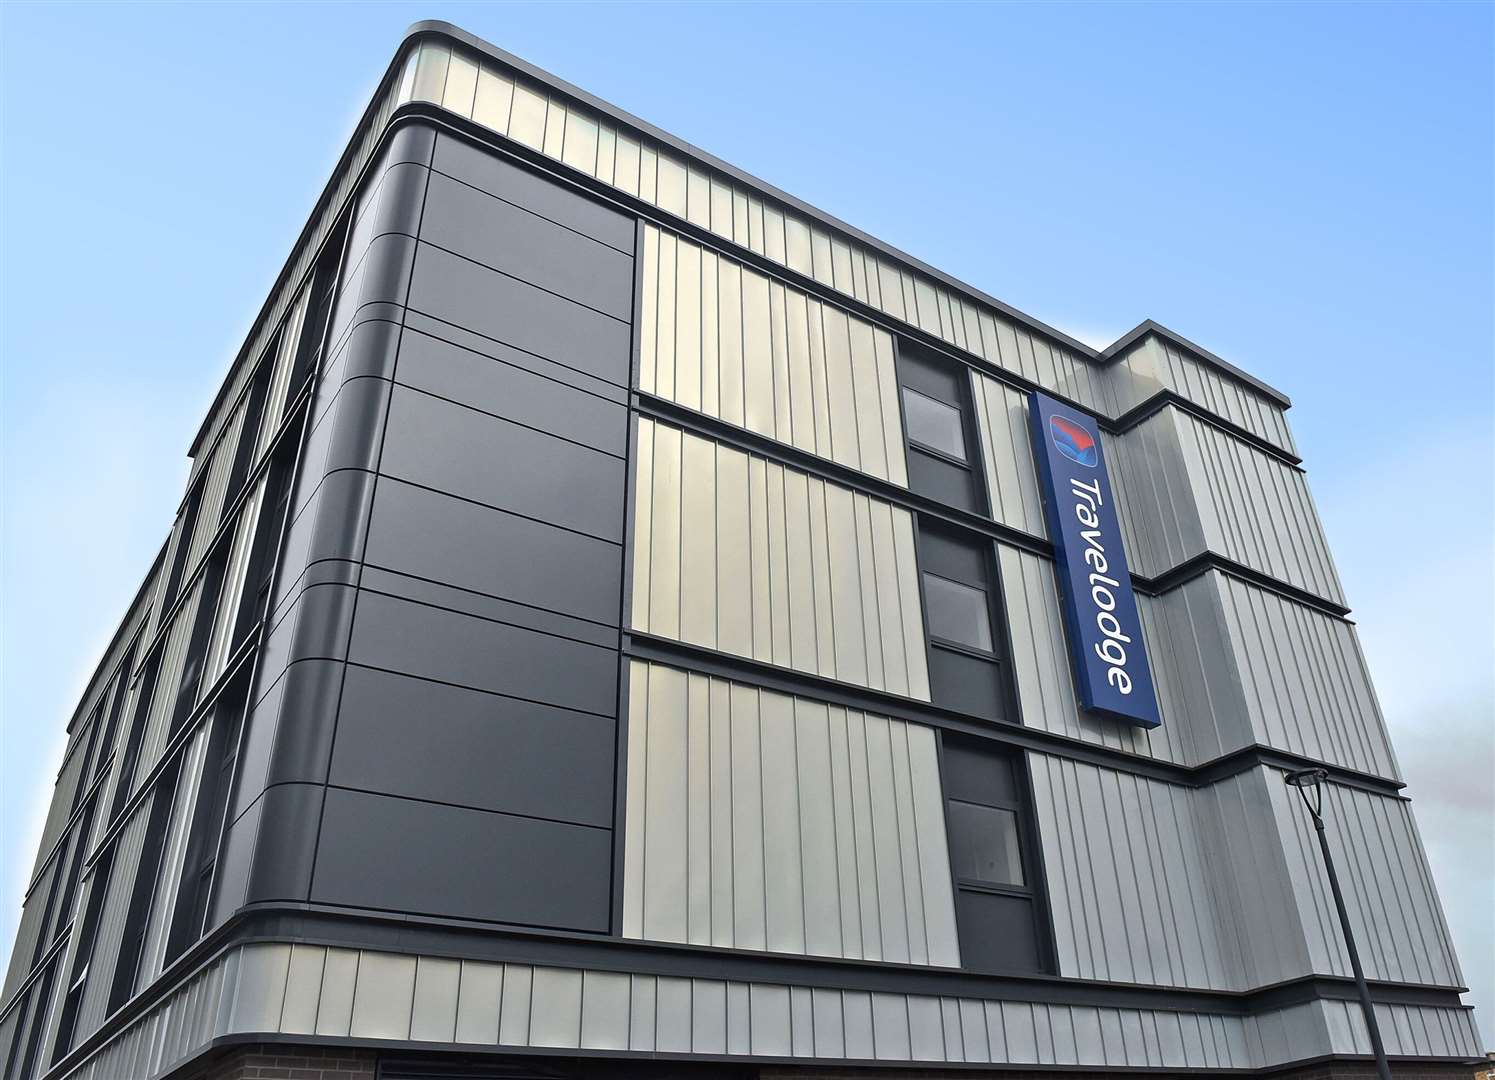 Travelodge in Sittingbourne's Bourne Place has opened